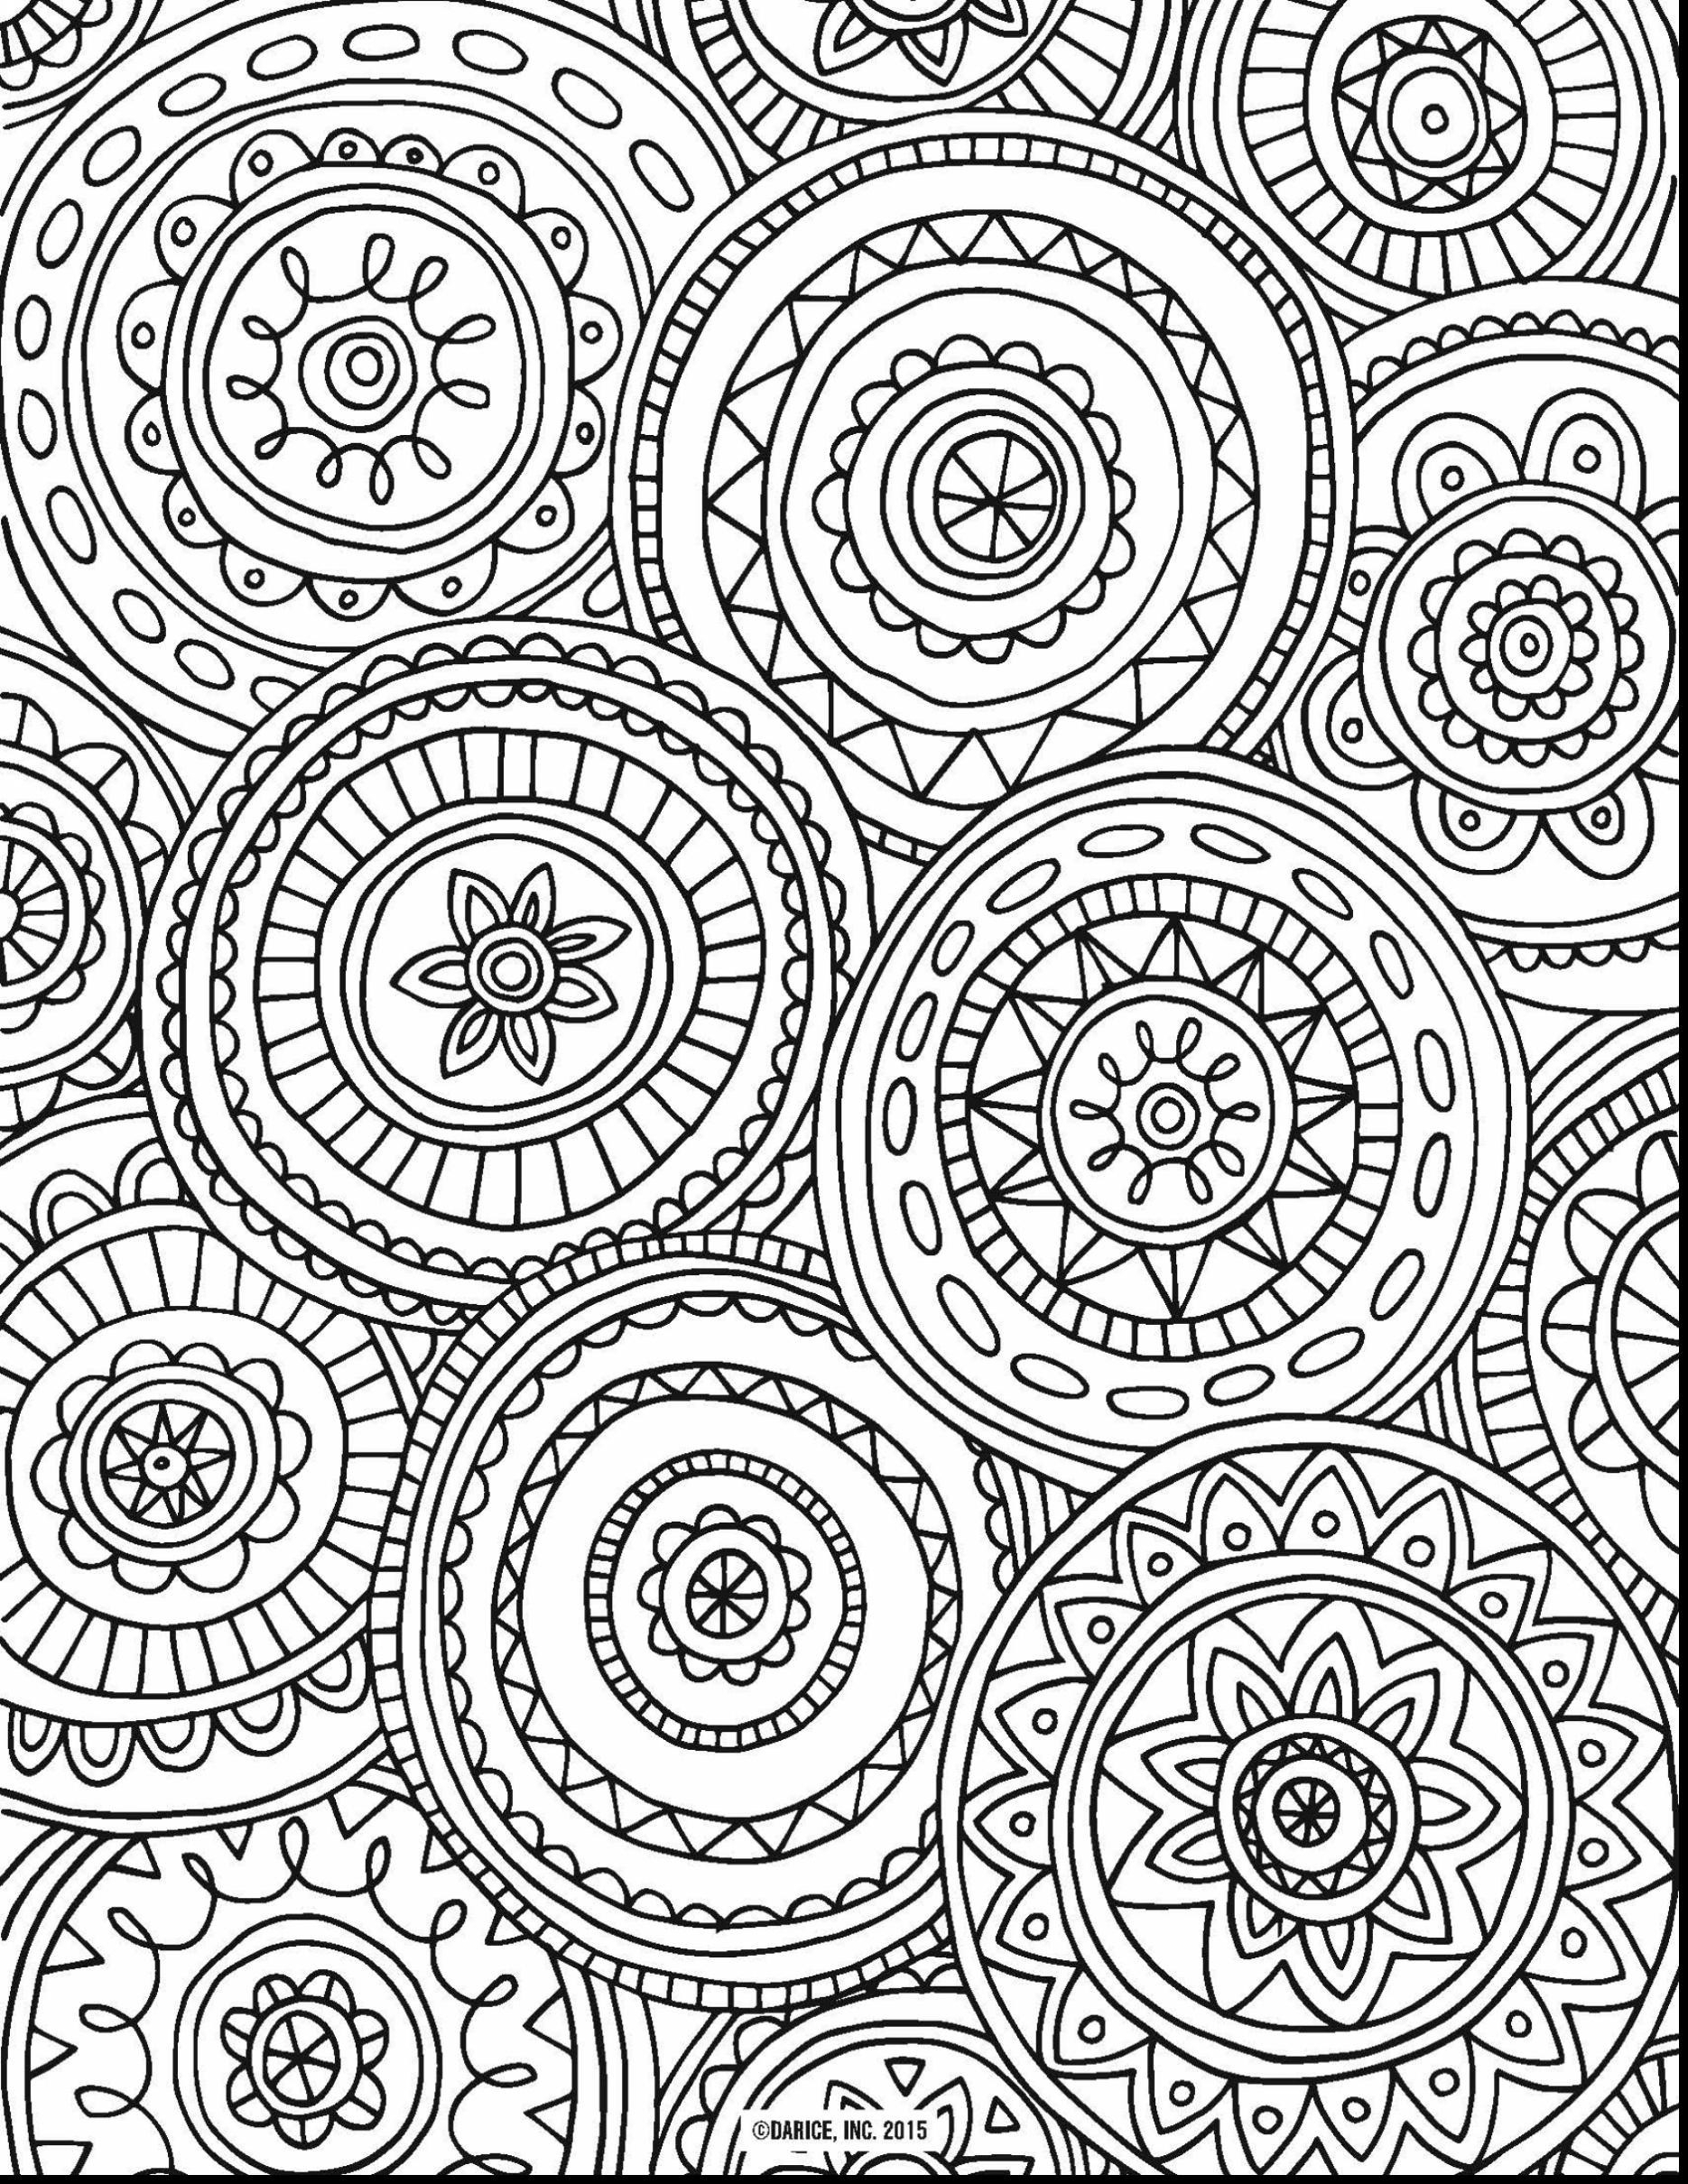 Free Printable Mandala Coloring Pages Adults Coloring Pages Staggering Printable Mandala Coloring Pages Free